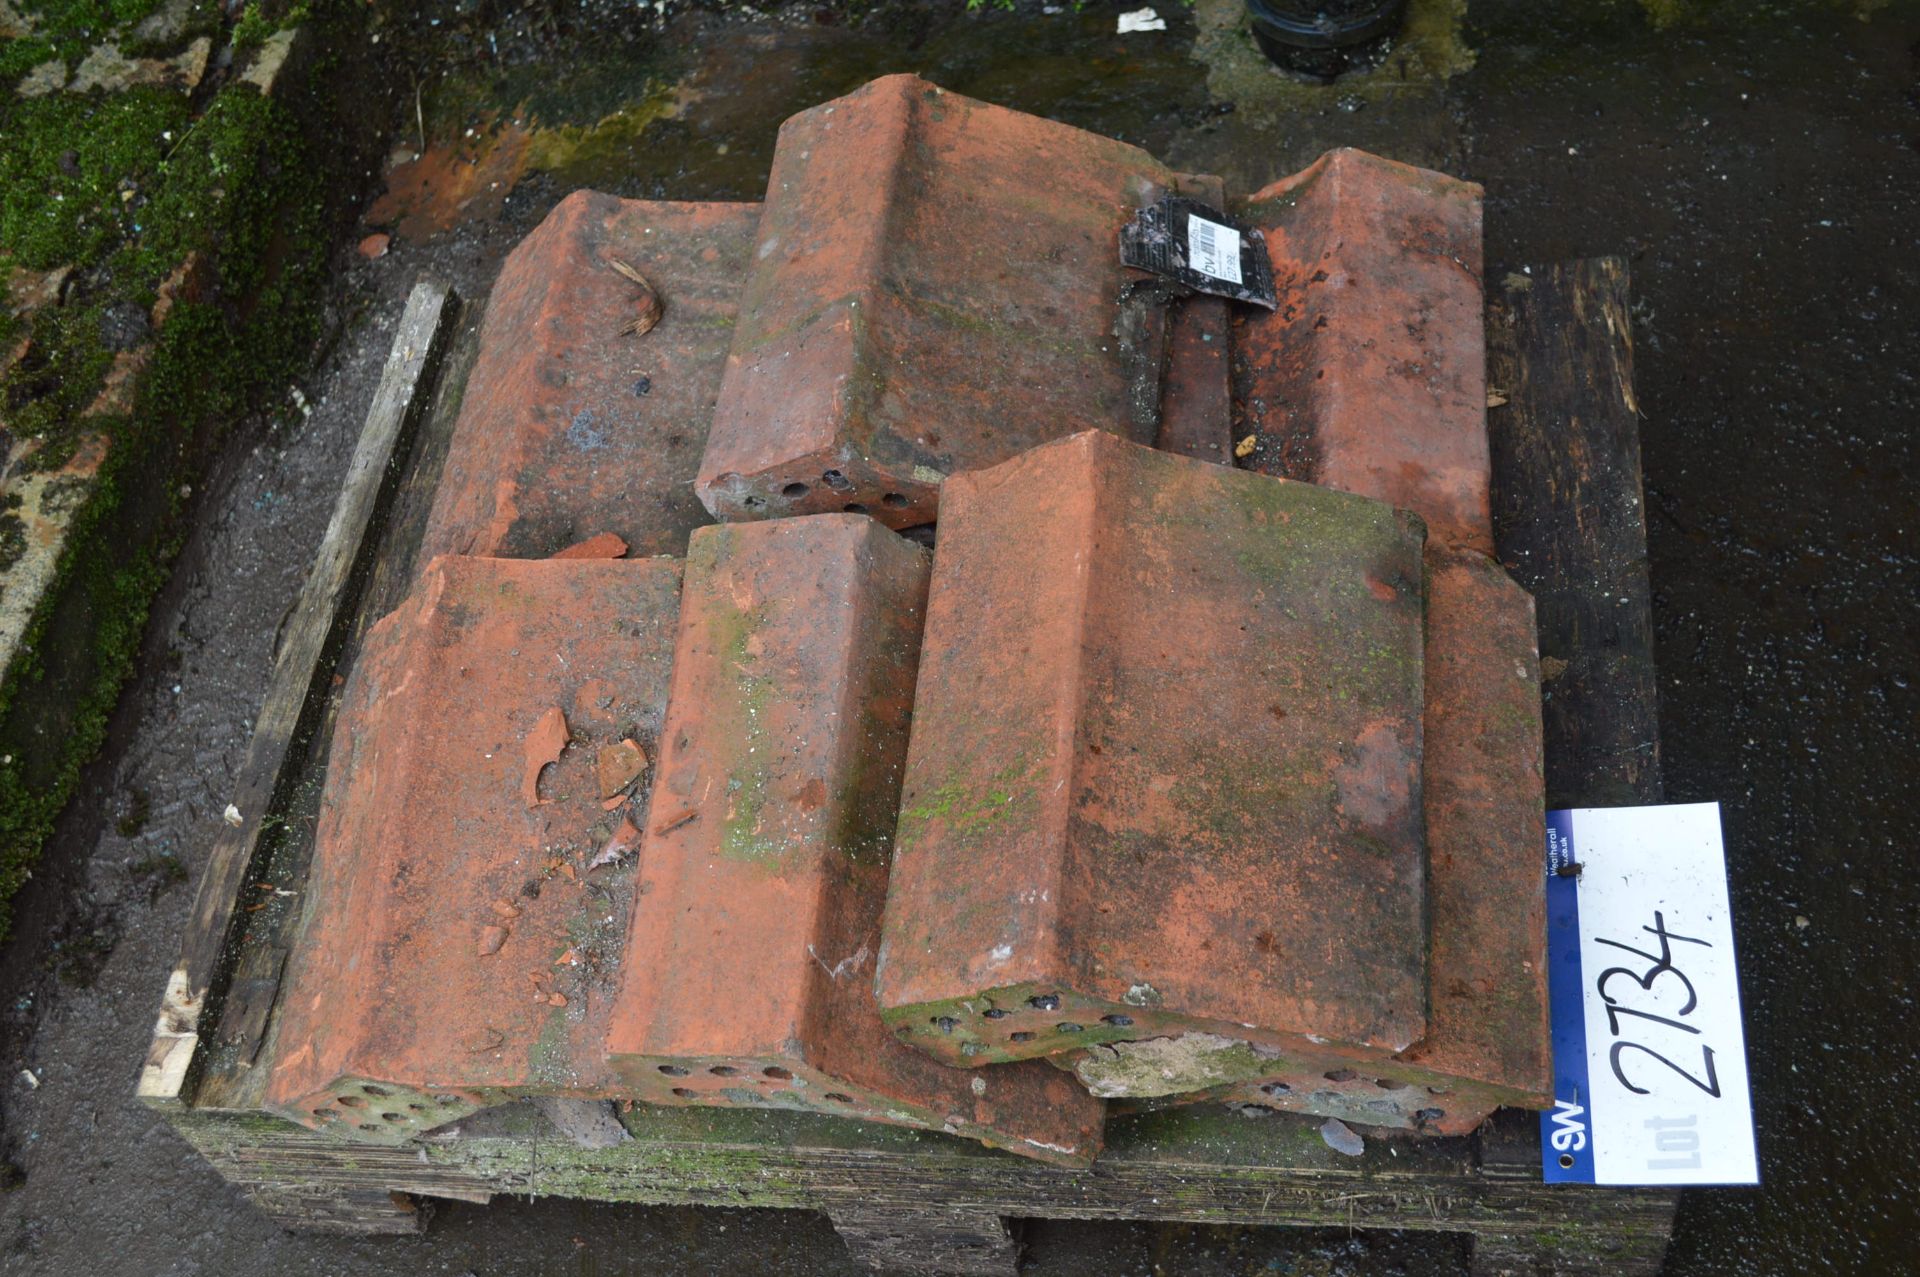 Roof Ridge Tiles, as set out on pallet